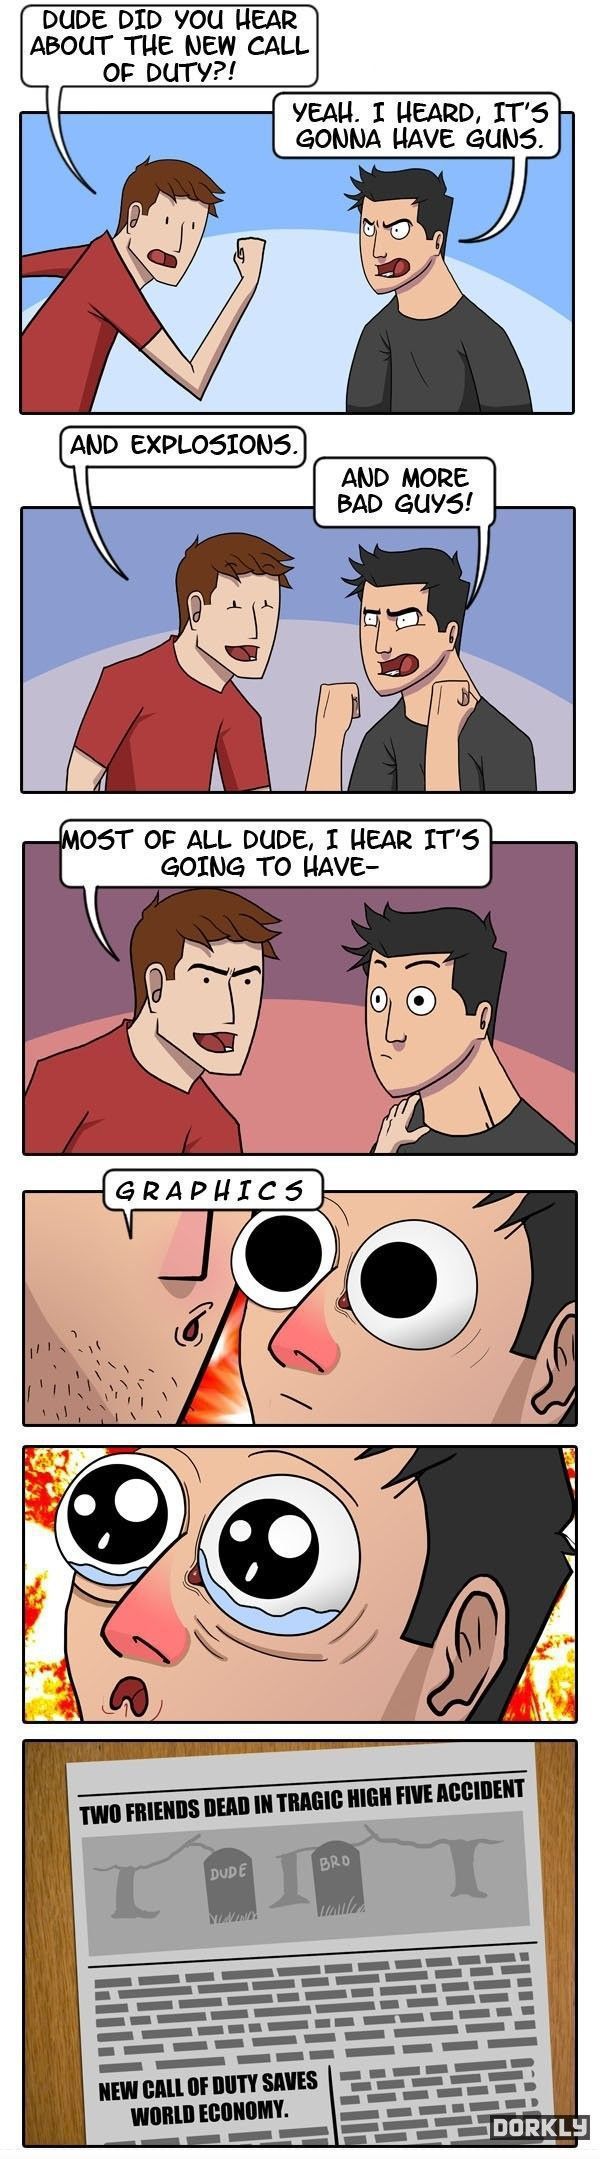 call of duty fan comics - Dude Did You Hear About The New Call Of Duty?! Yeah. I Heard, It'S Gonna Have Guns. And Explosions. And More Bad Guys! Most Of All Dude, I Hear It'S Going To Have Graphics Two Friends Dead In Tragic High Five Accident Dude Bro M 